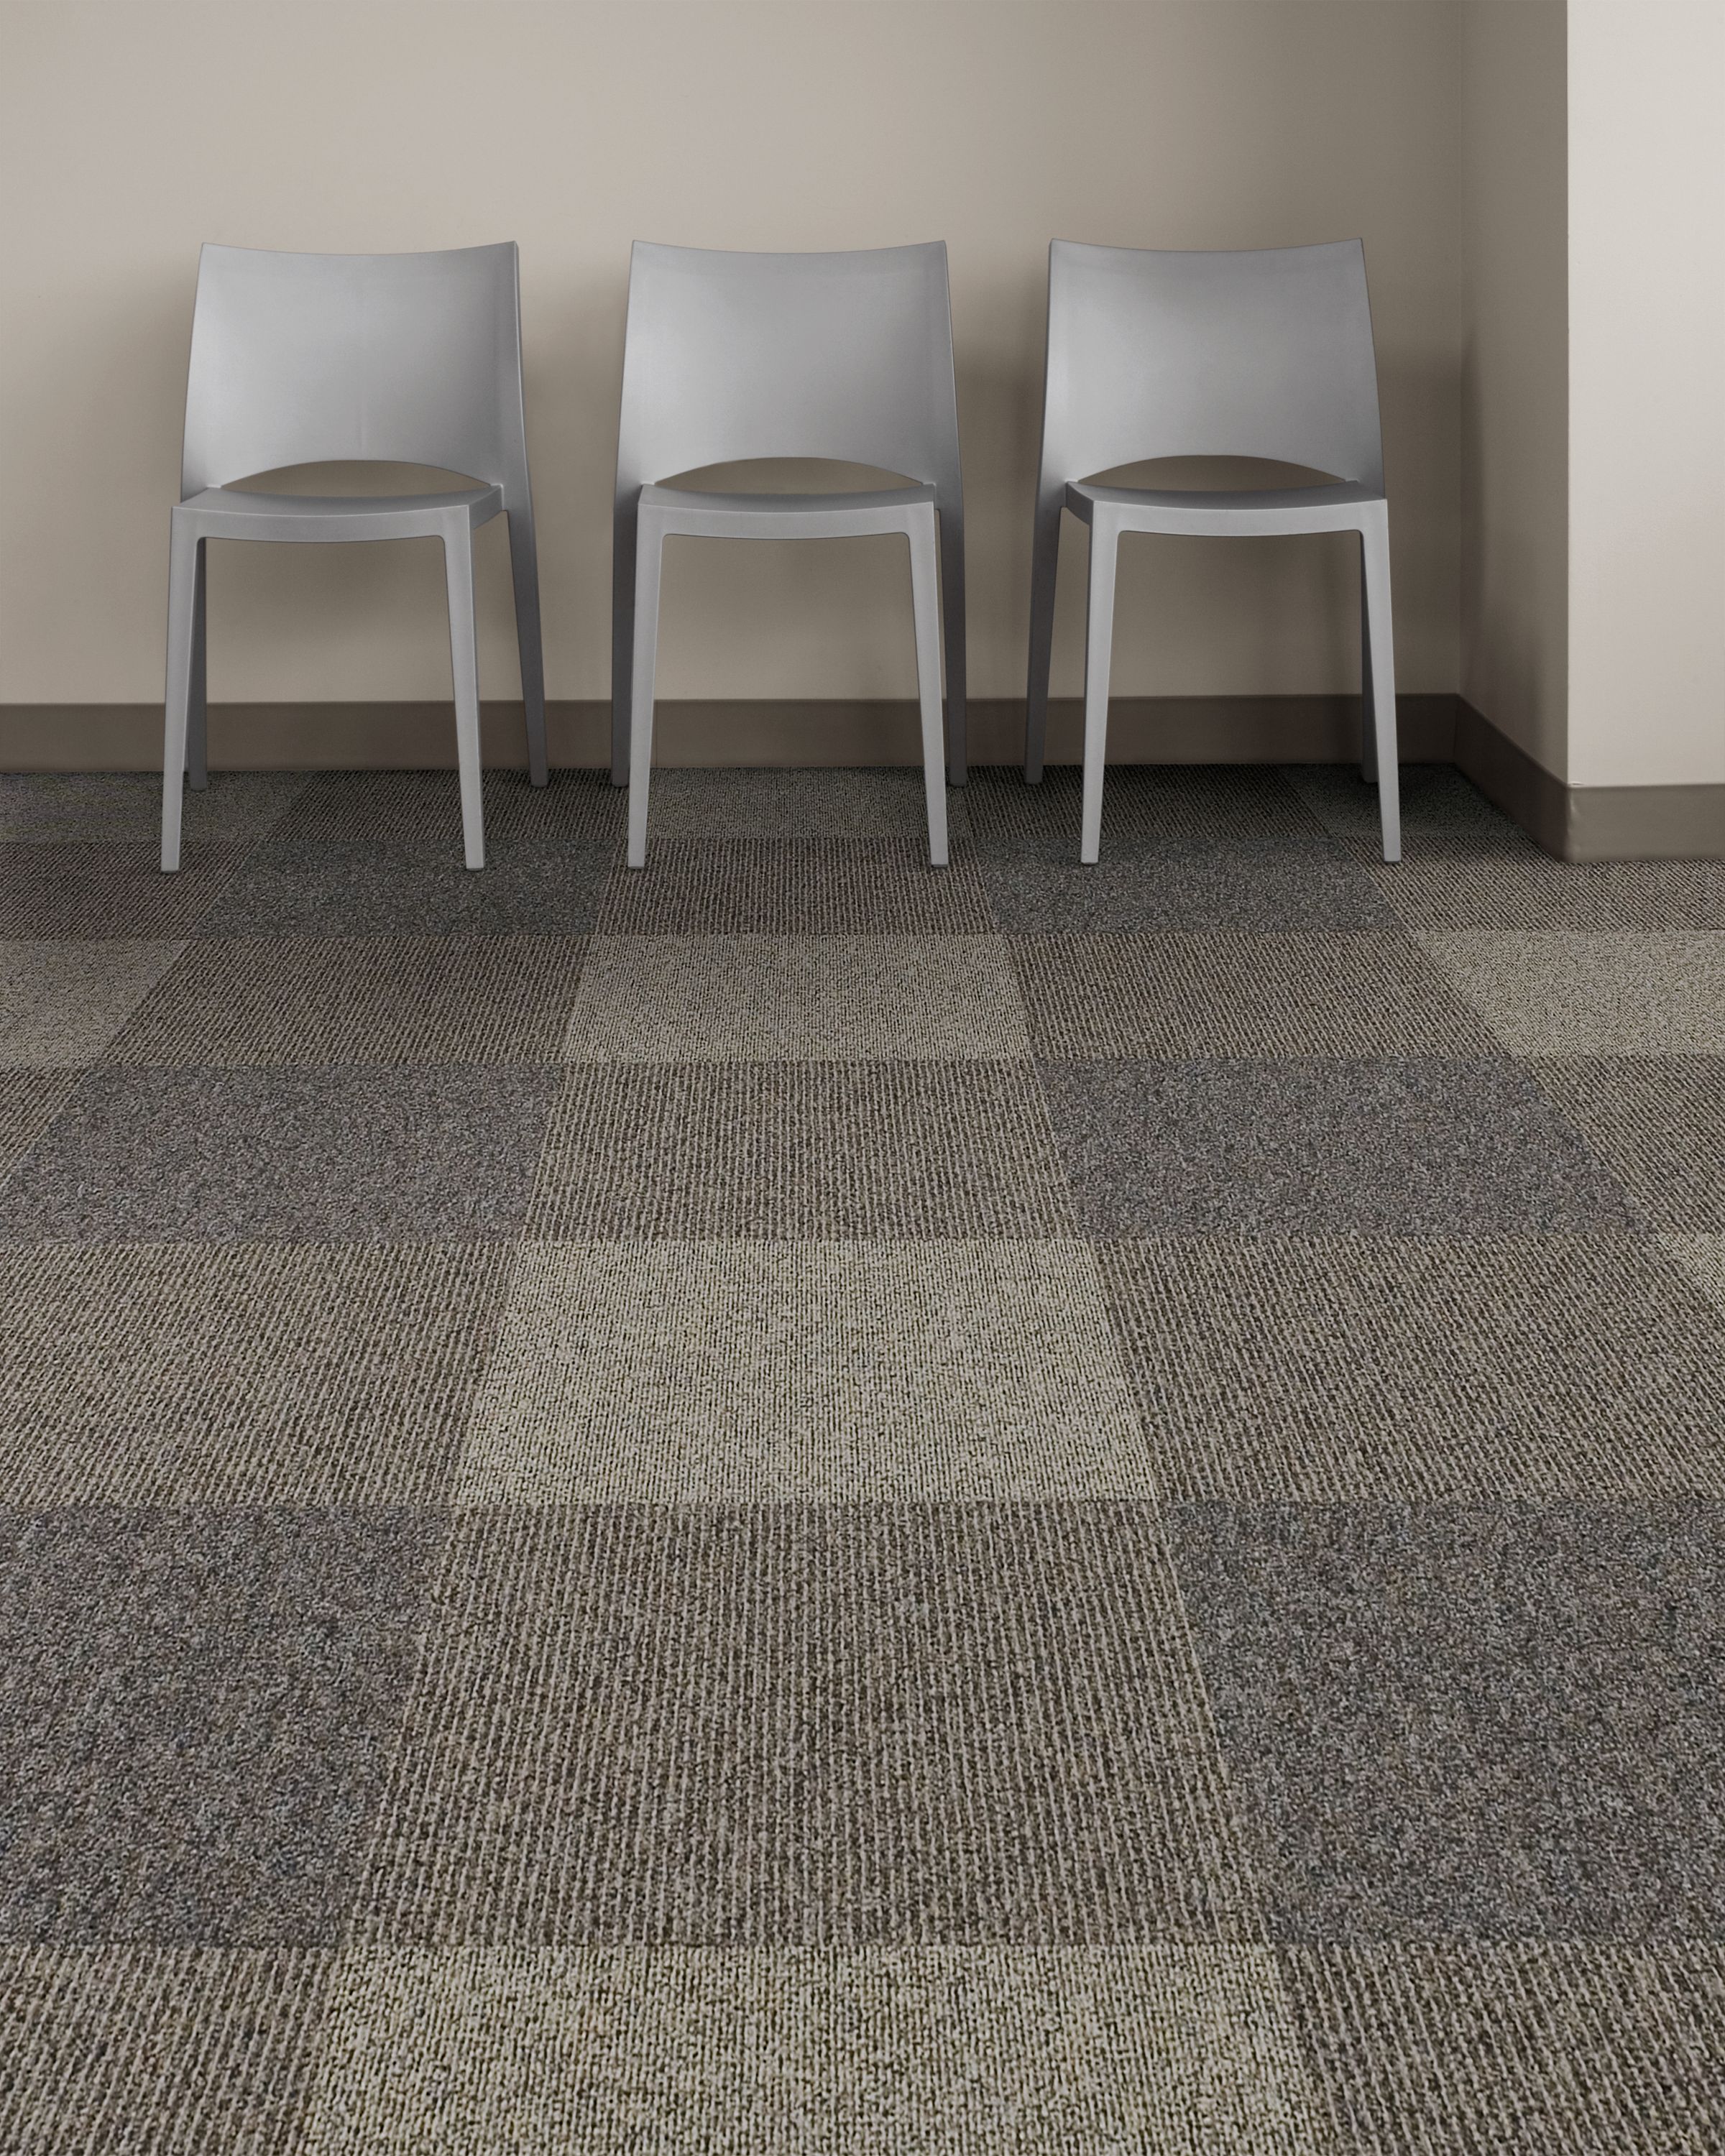 Interface Broomed, Grooved and Brushed carpet tile in room with three chairs imagen número 5